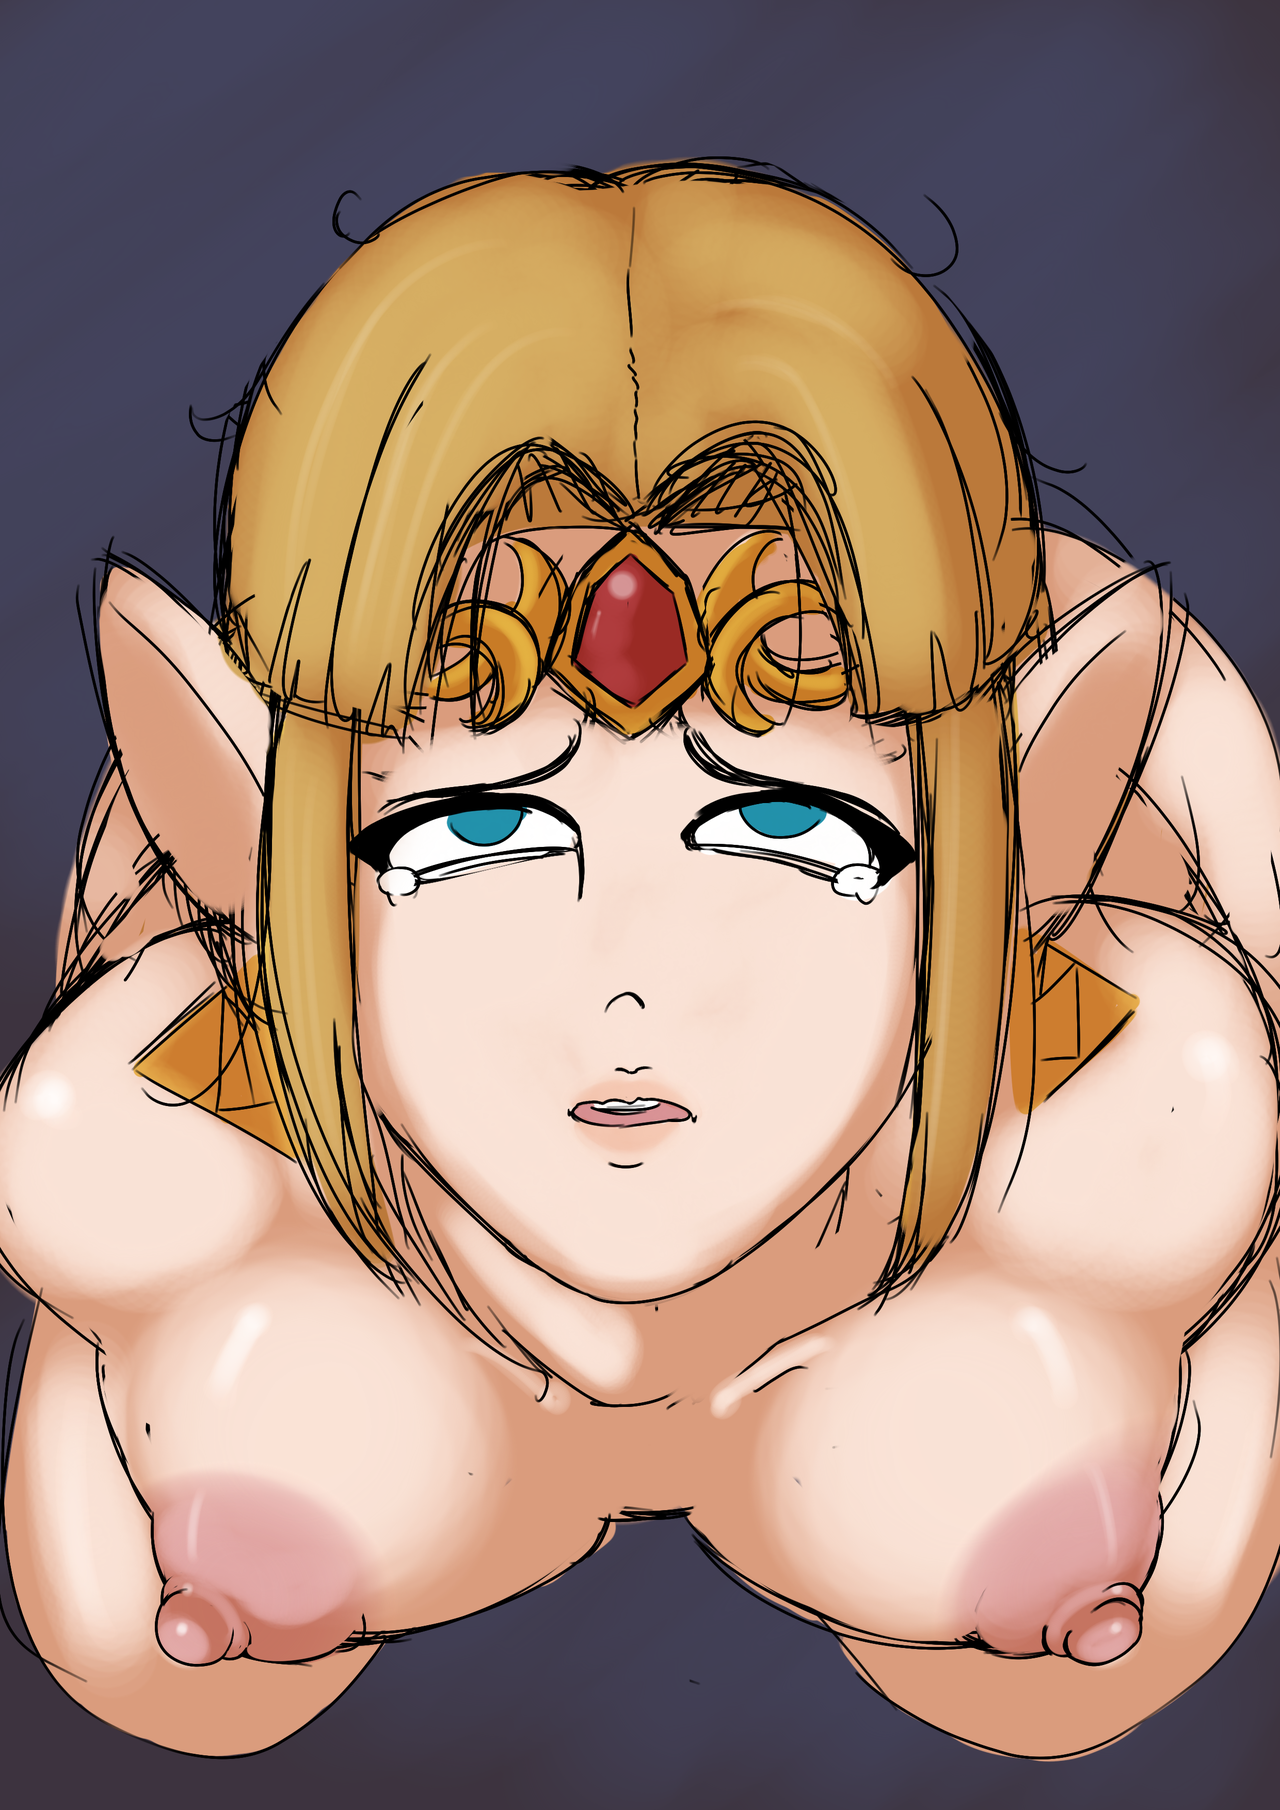 Smash sketch 4/10I thought this will be just 1 sketch, but Zelda is way too cute